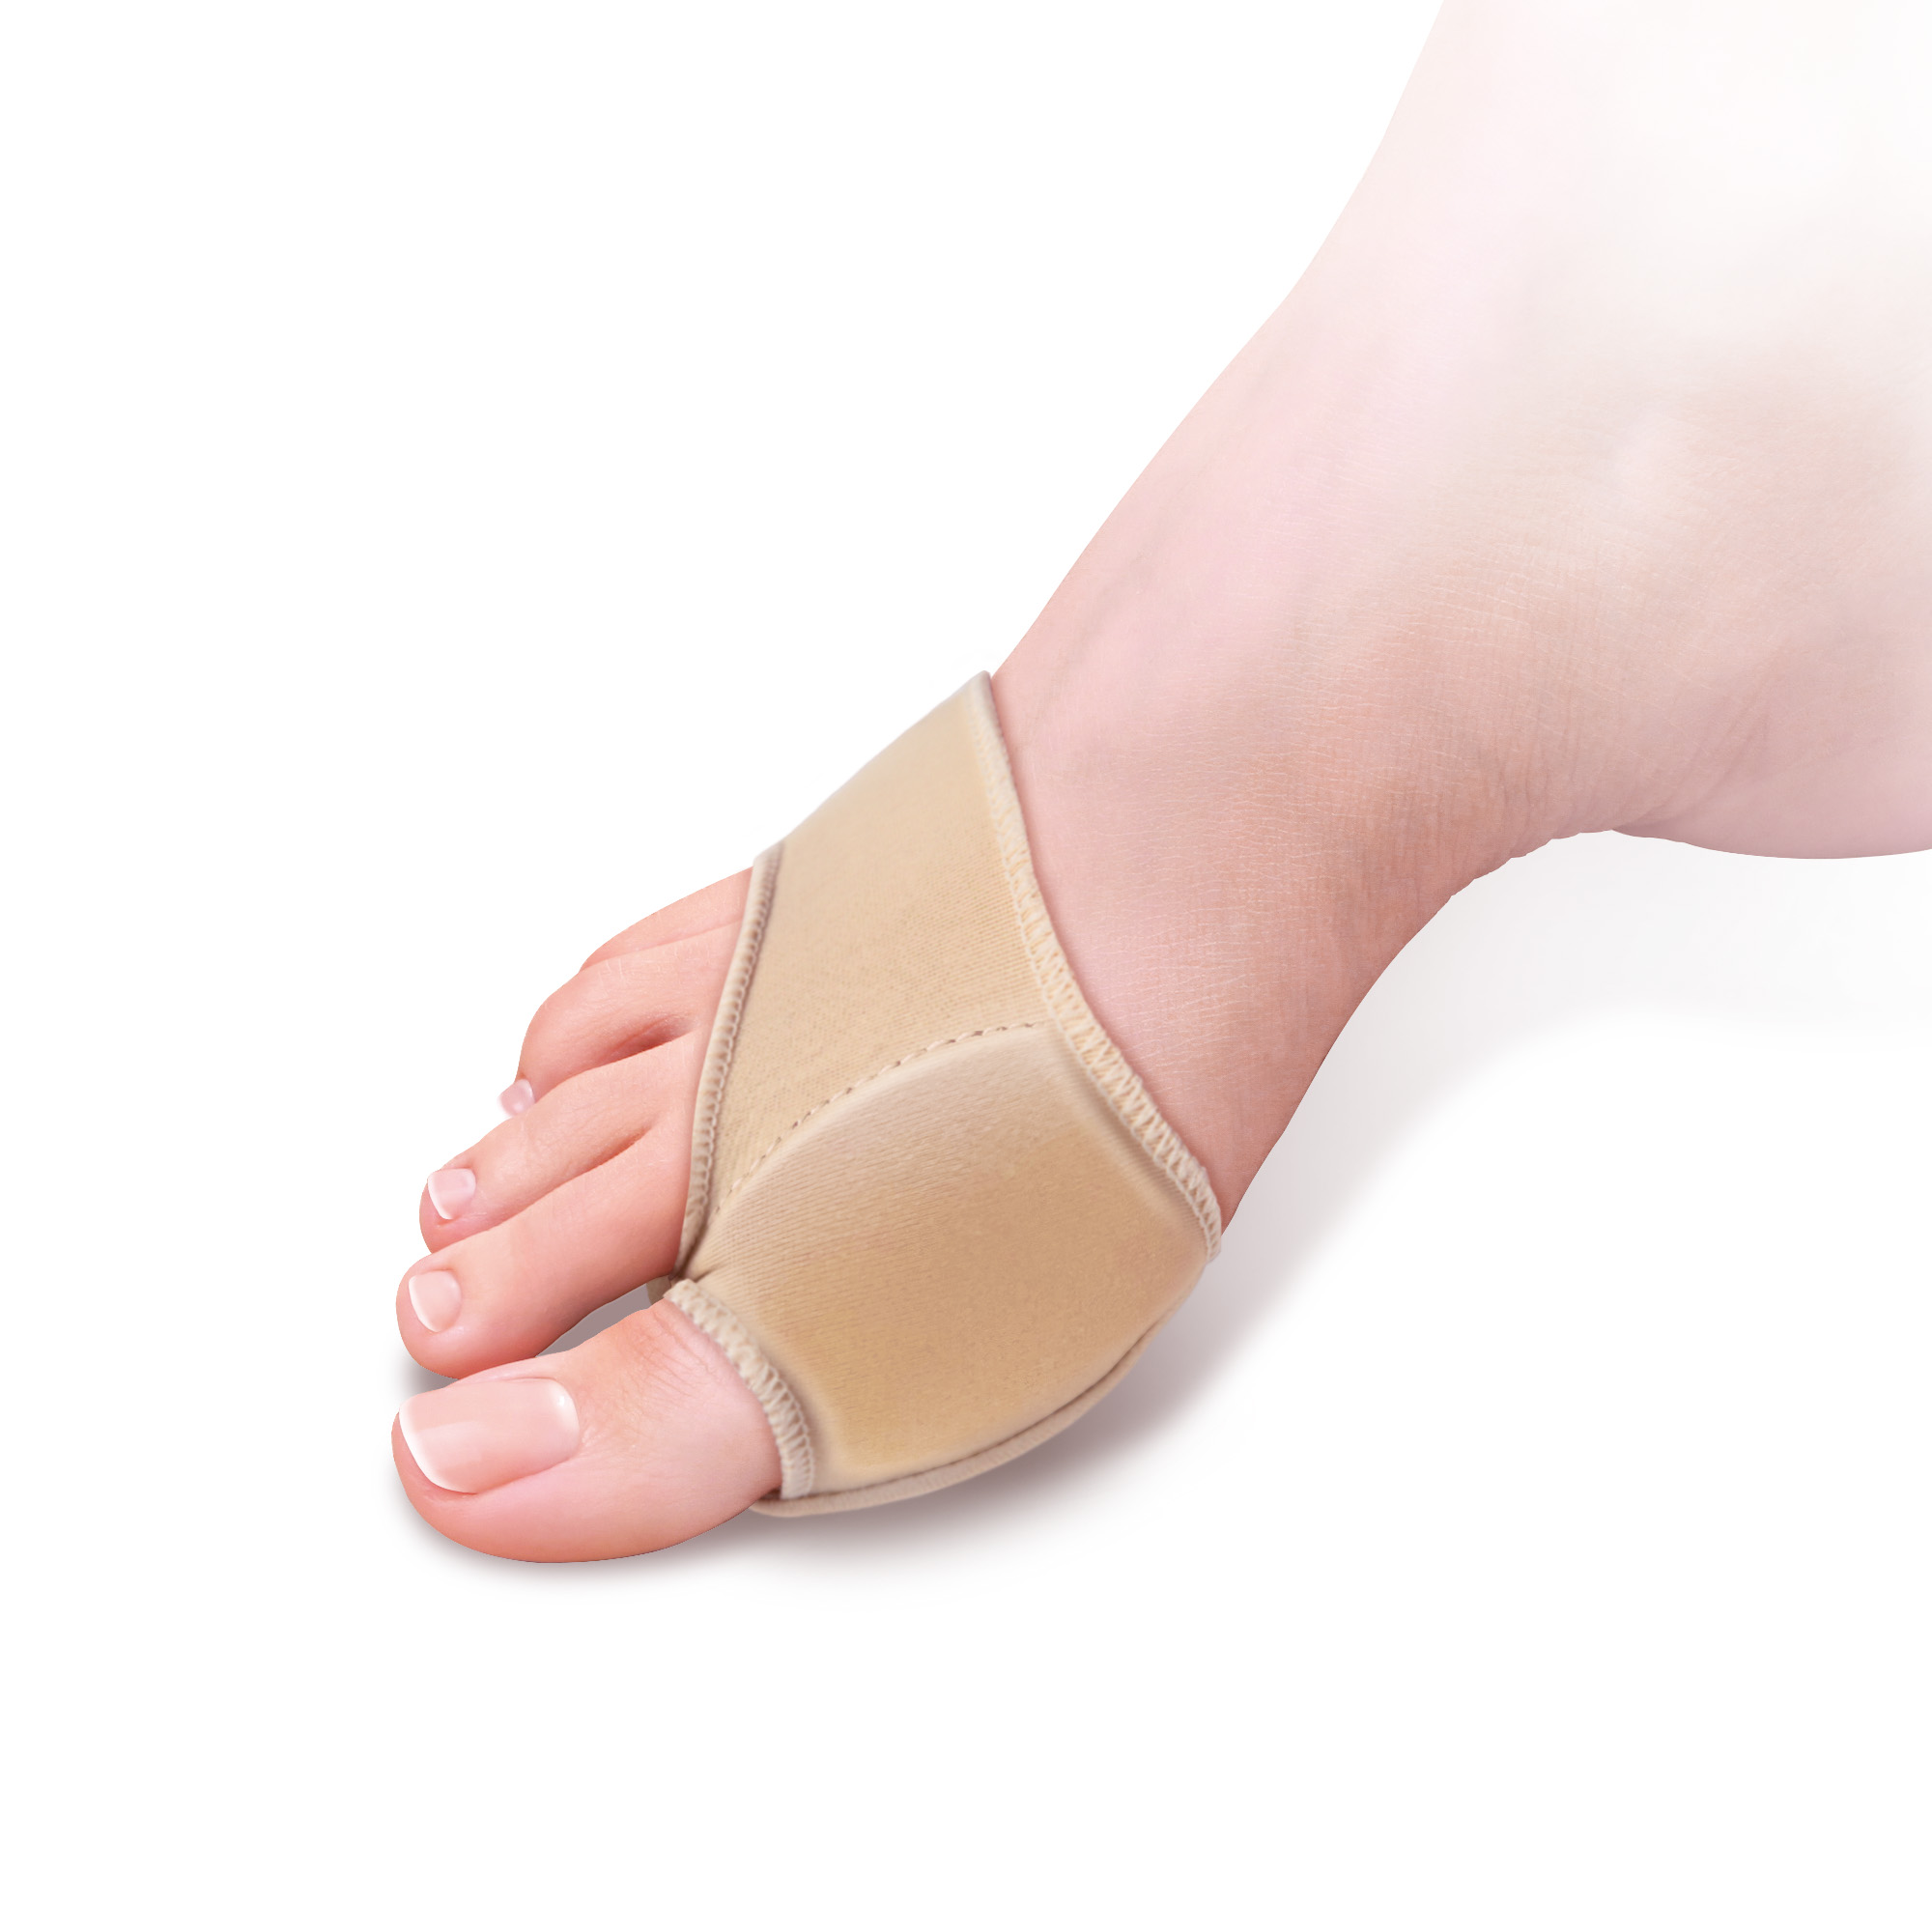 Forefoot cushions with double protection for big toe and metatarsals made of fabric and gel Size Small 1 pair